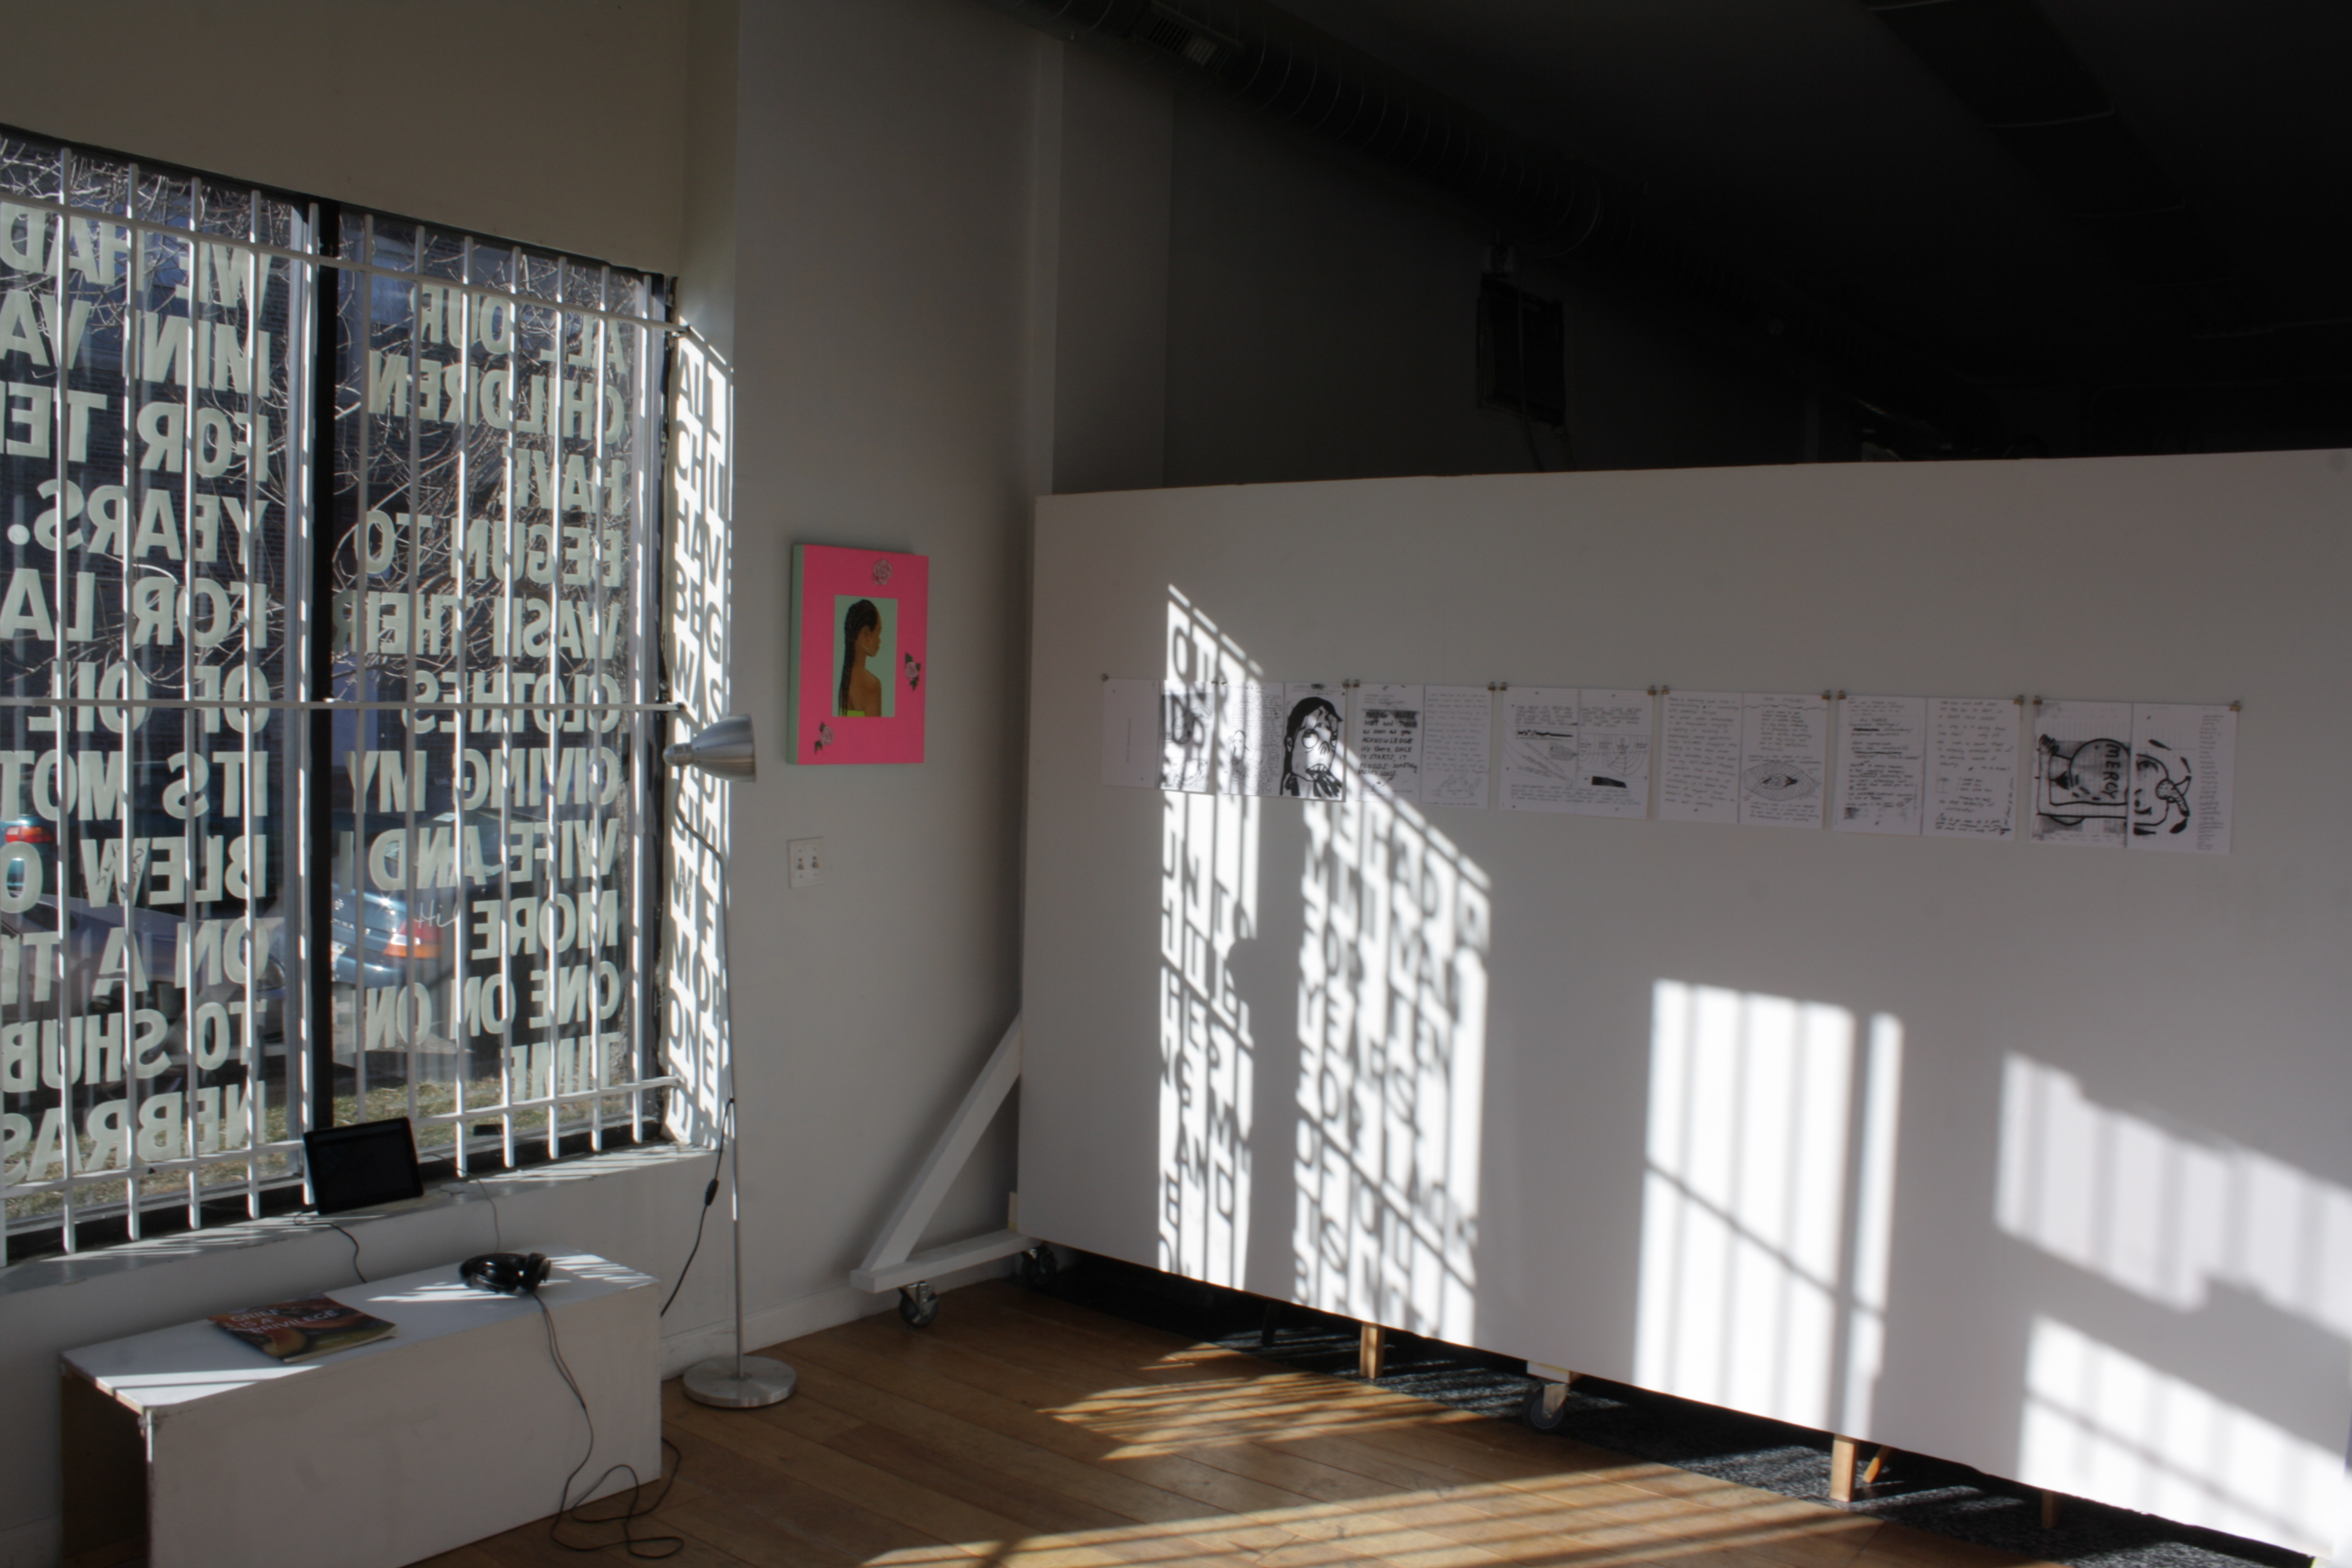 An installation view of the recently closed show at Hume, "Feeling Pink Like My Insides." Light streams through a window covered by letter that make up part of a semi-permanent installation by Alberto Aguilar. On the walls hang works by Ari Brielle and Caroline Hicks. Photo by Hannah Siegfried